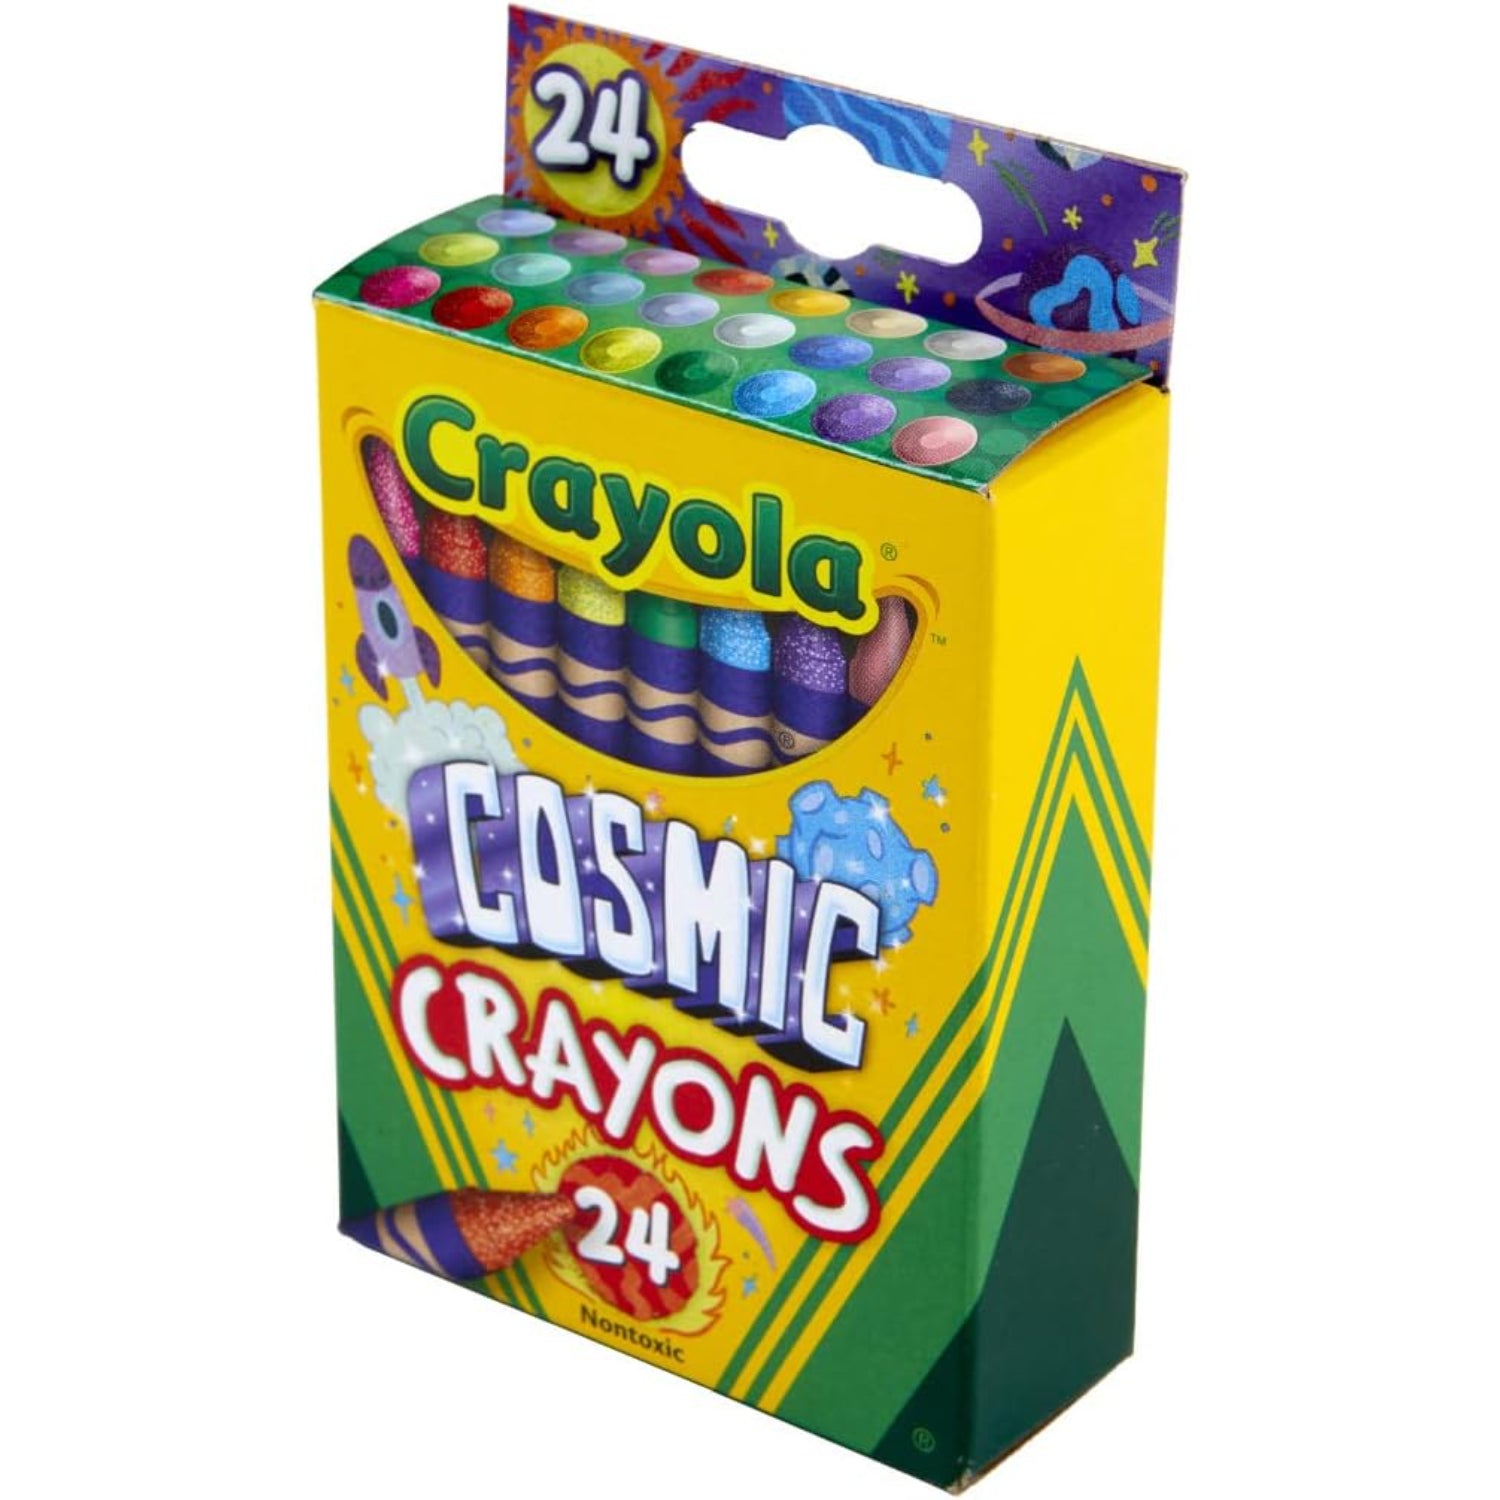 Crayola Classic Color Pack Crayons 24 Count (Pack of 4) 24 Count